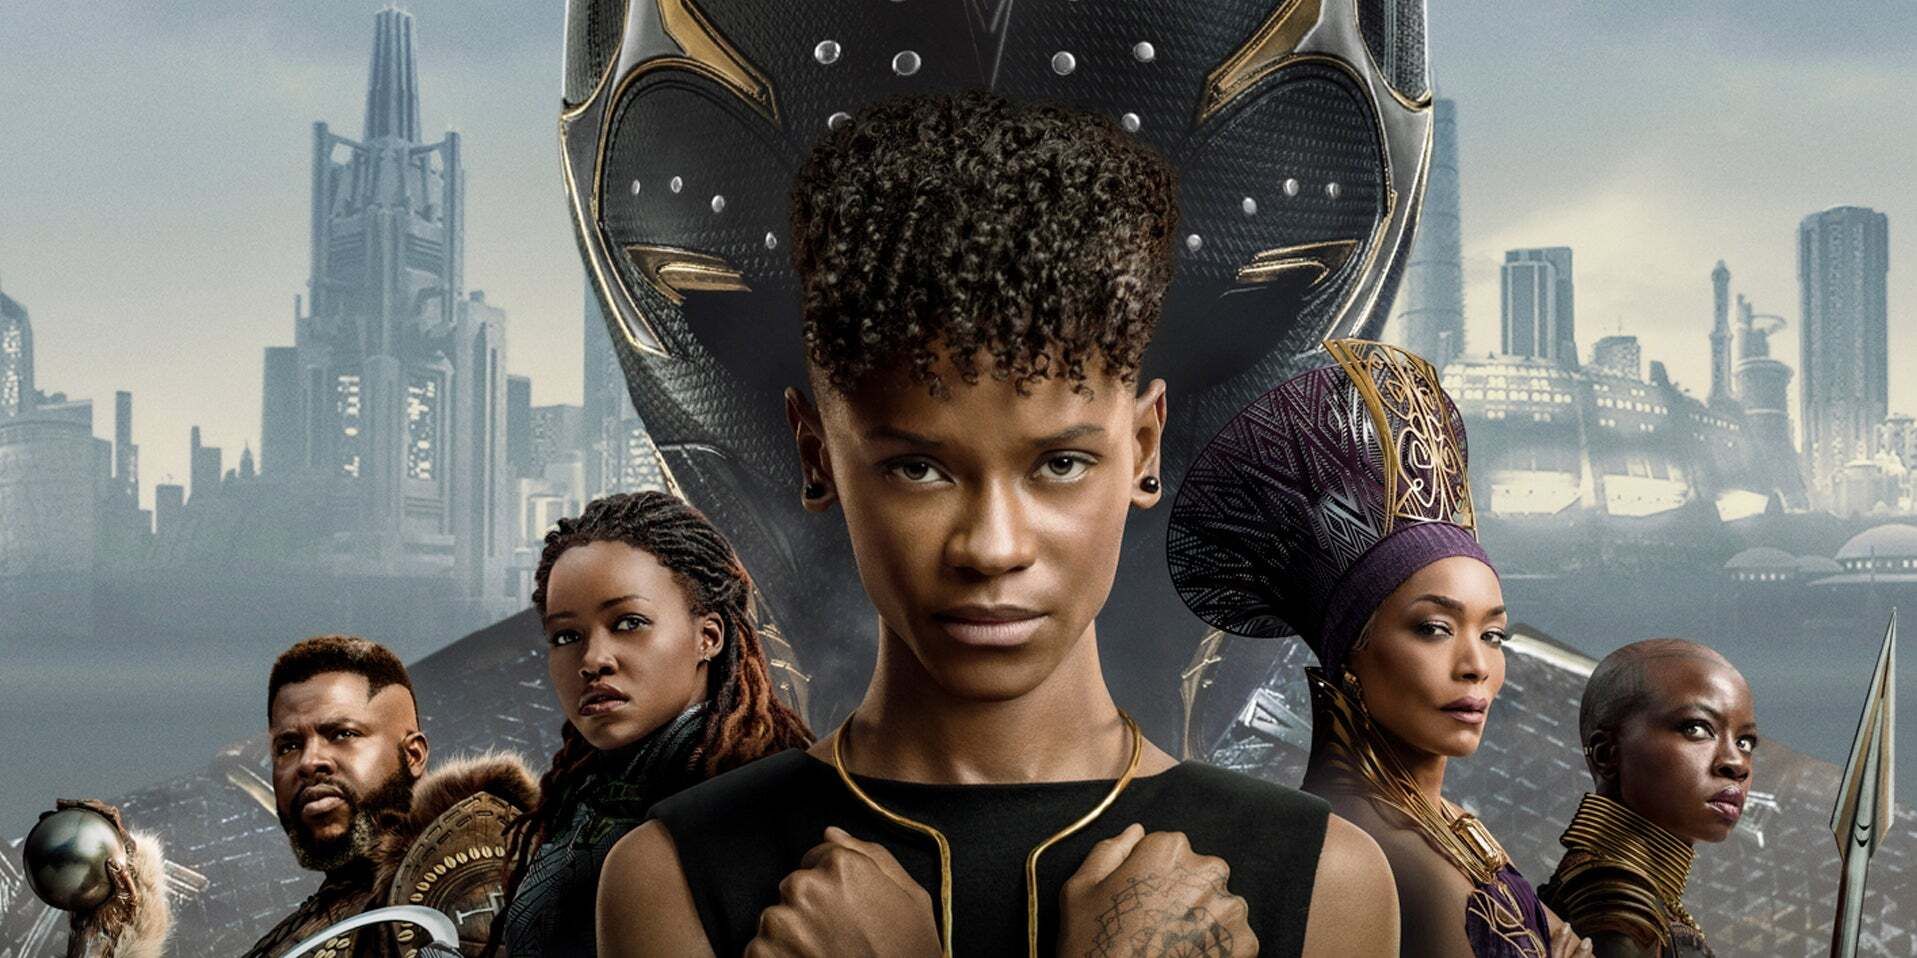 Where to Watch Black Panther: Wakanda Forever